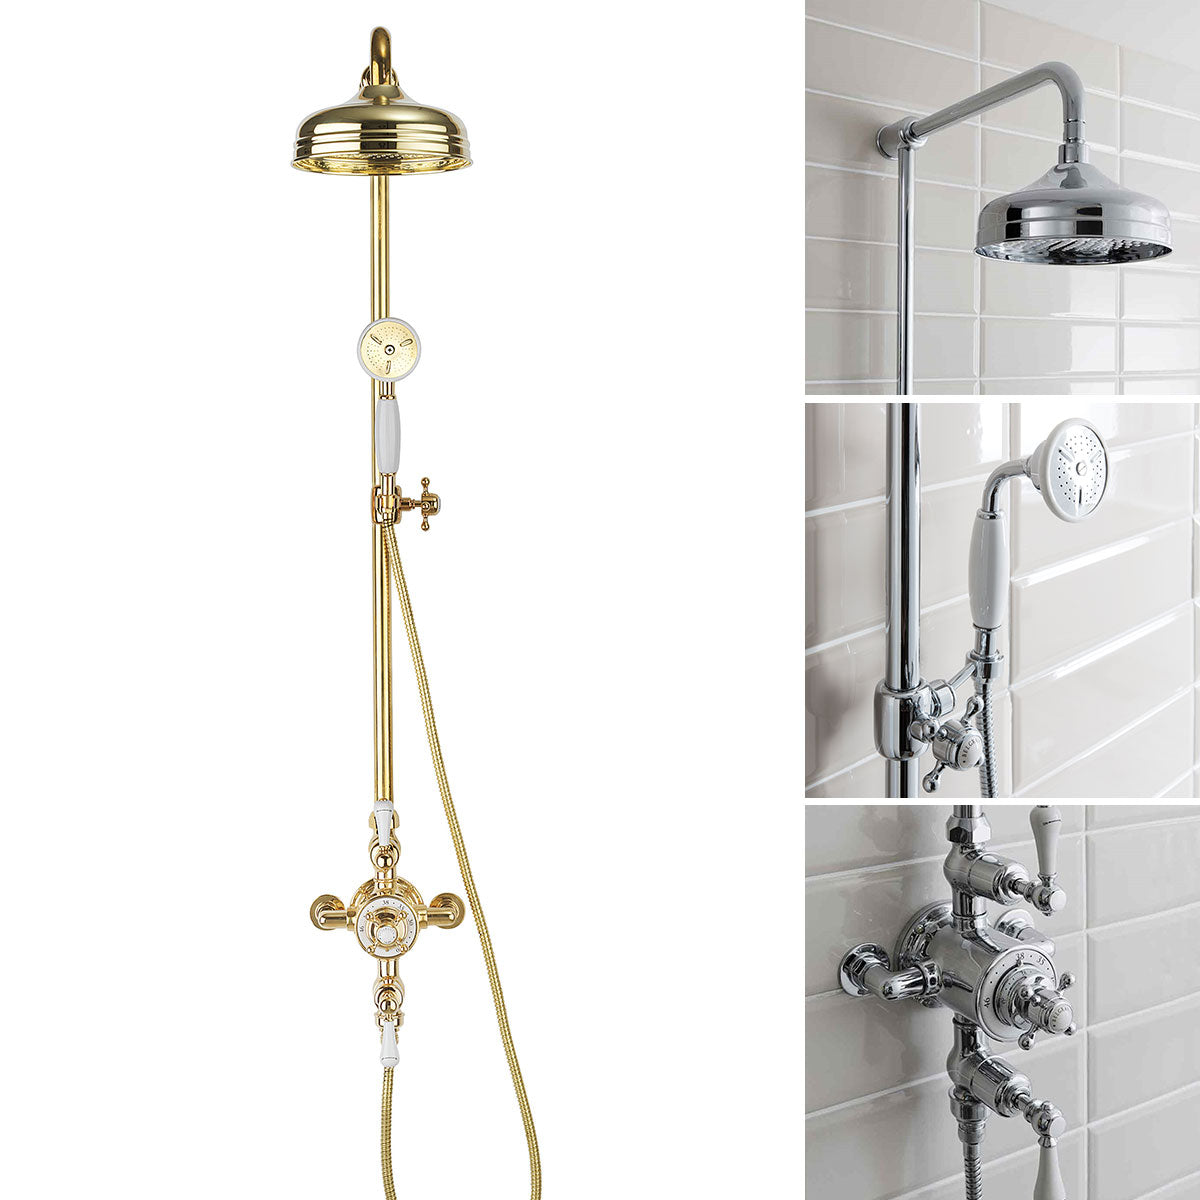 Crosswater Belgravia Exposed Thermostatic Shower Valve With Fixed Shower Head & Slide Rail Handset